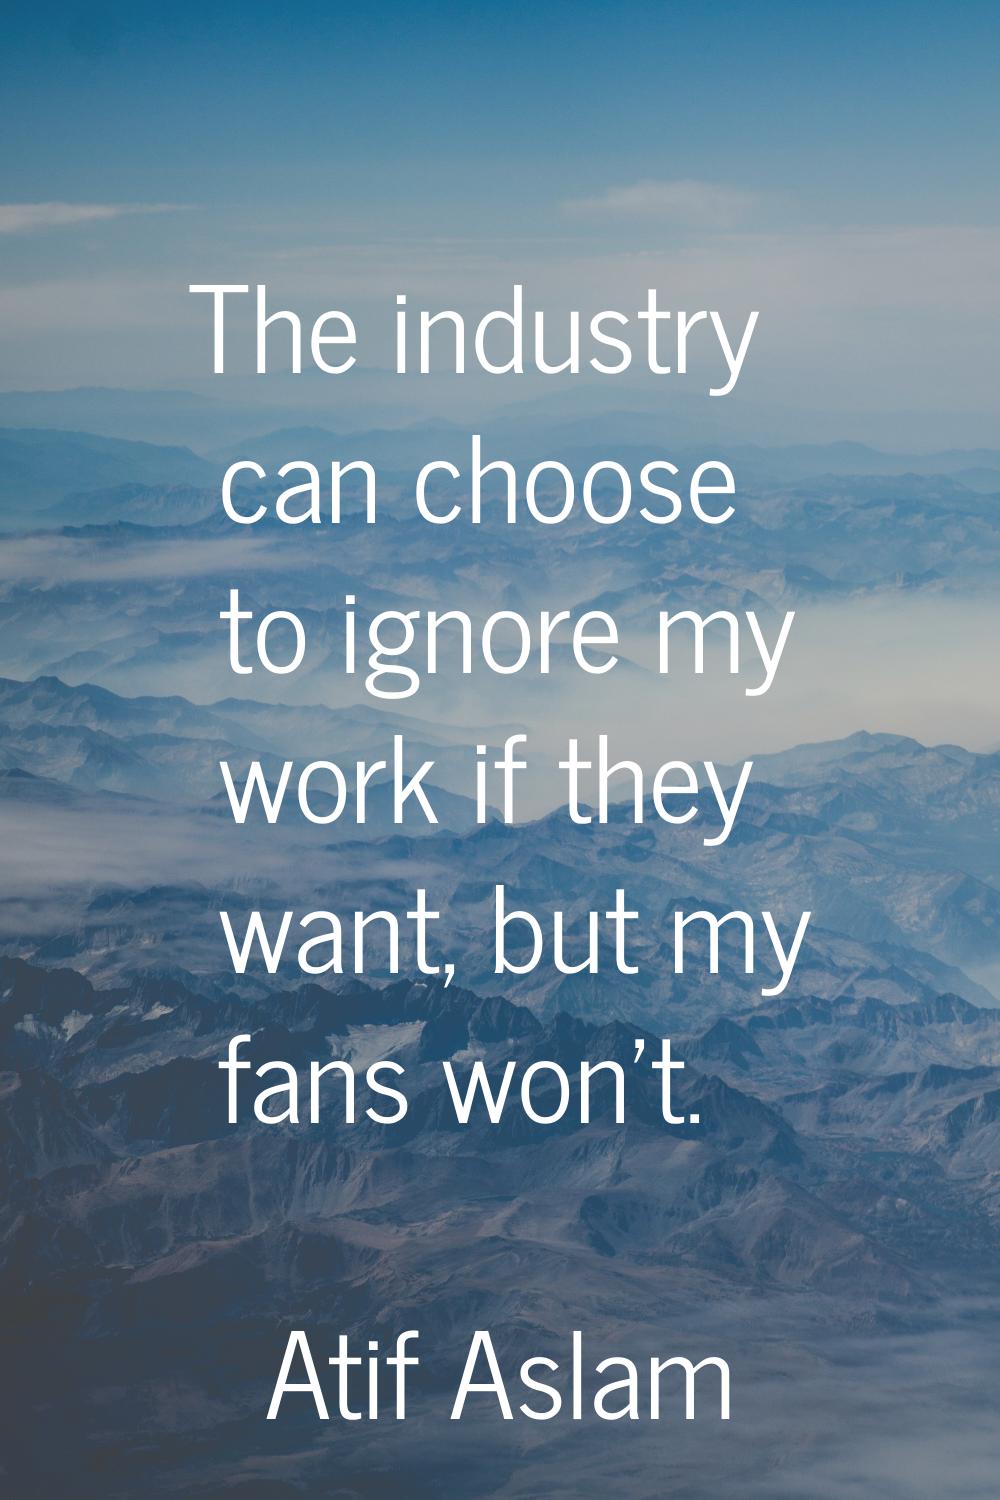 The industry can choose to ignore my work if they want, but my fans won't.